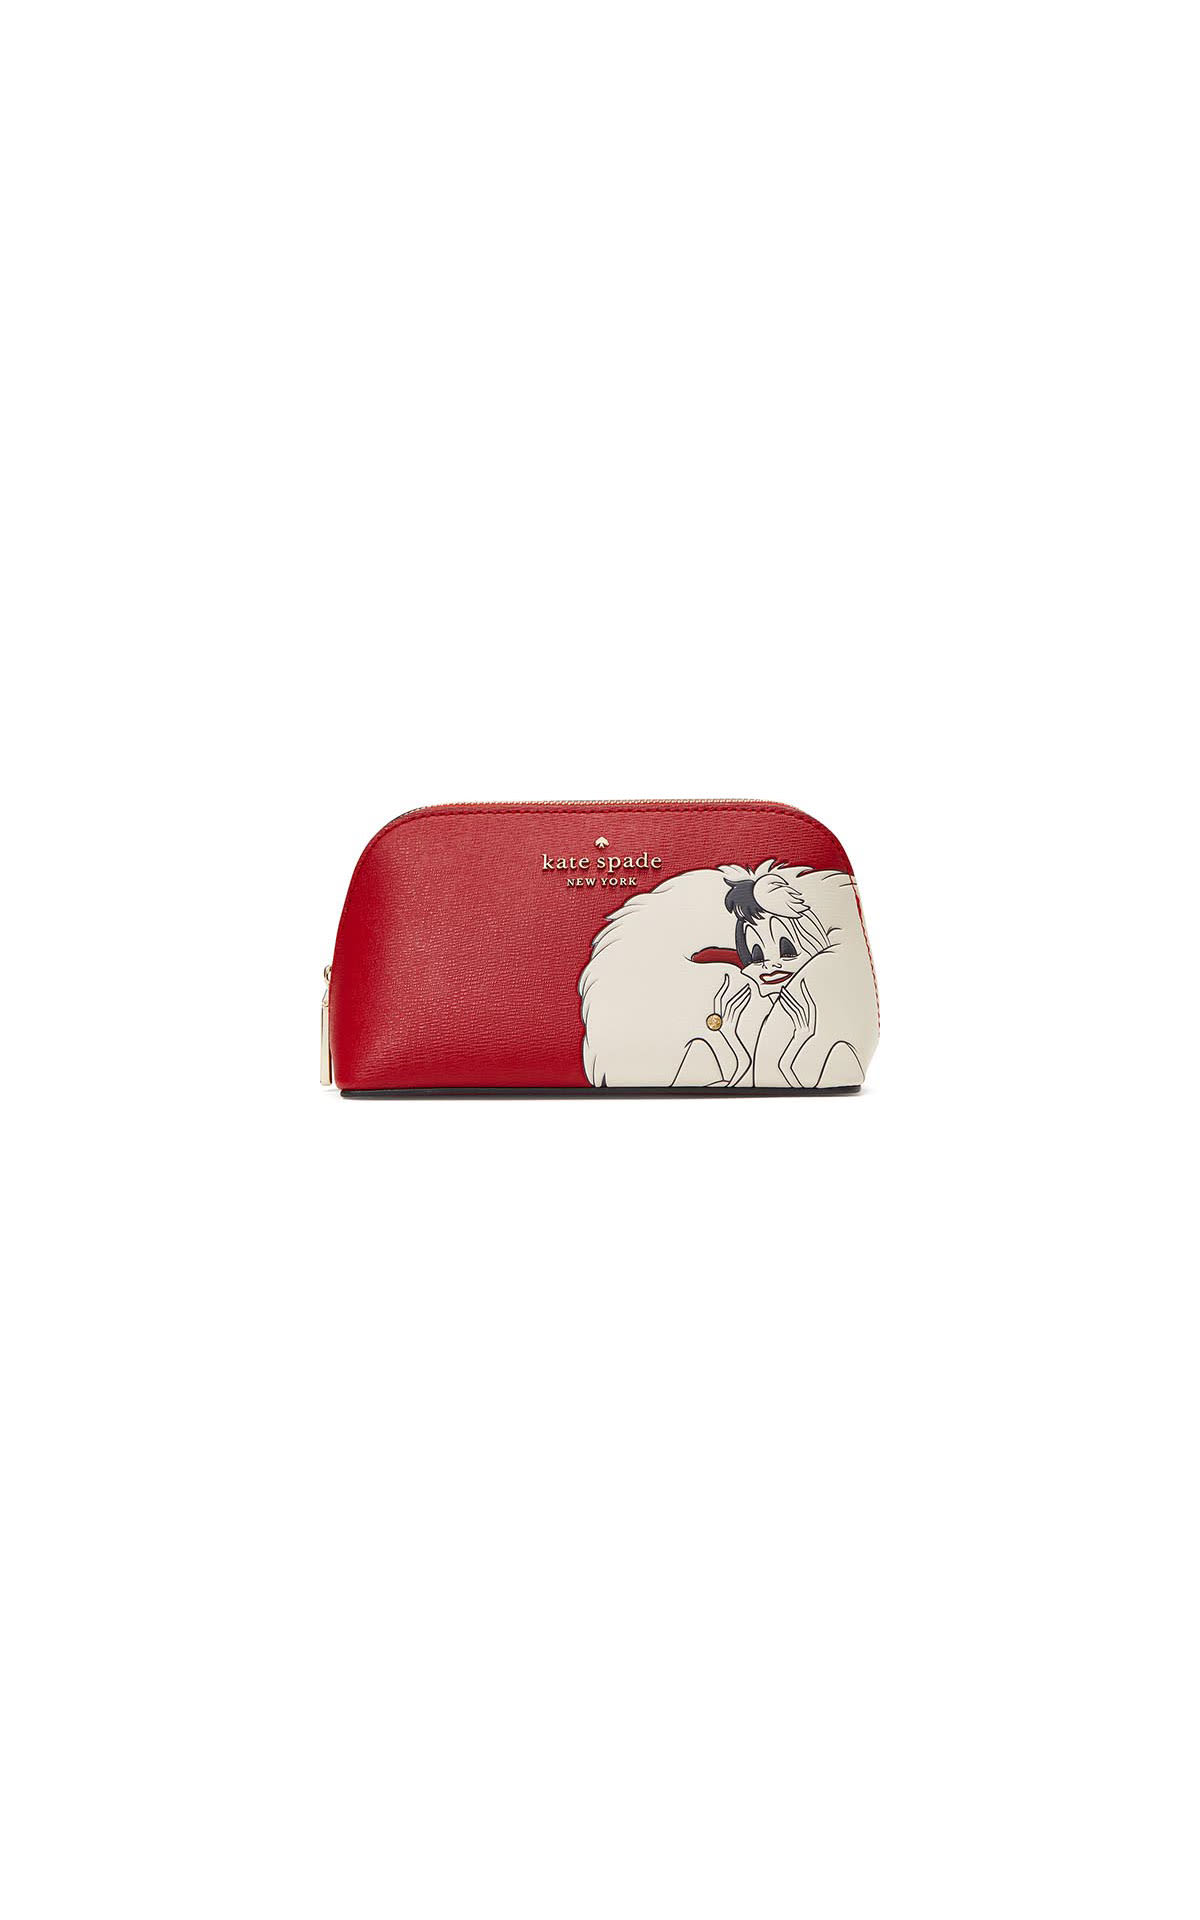 Kate Spade Disney x Kate Spade New York 101 Dalmatians cosmetic case from Bicester Village